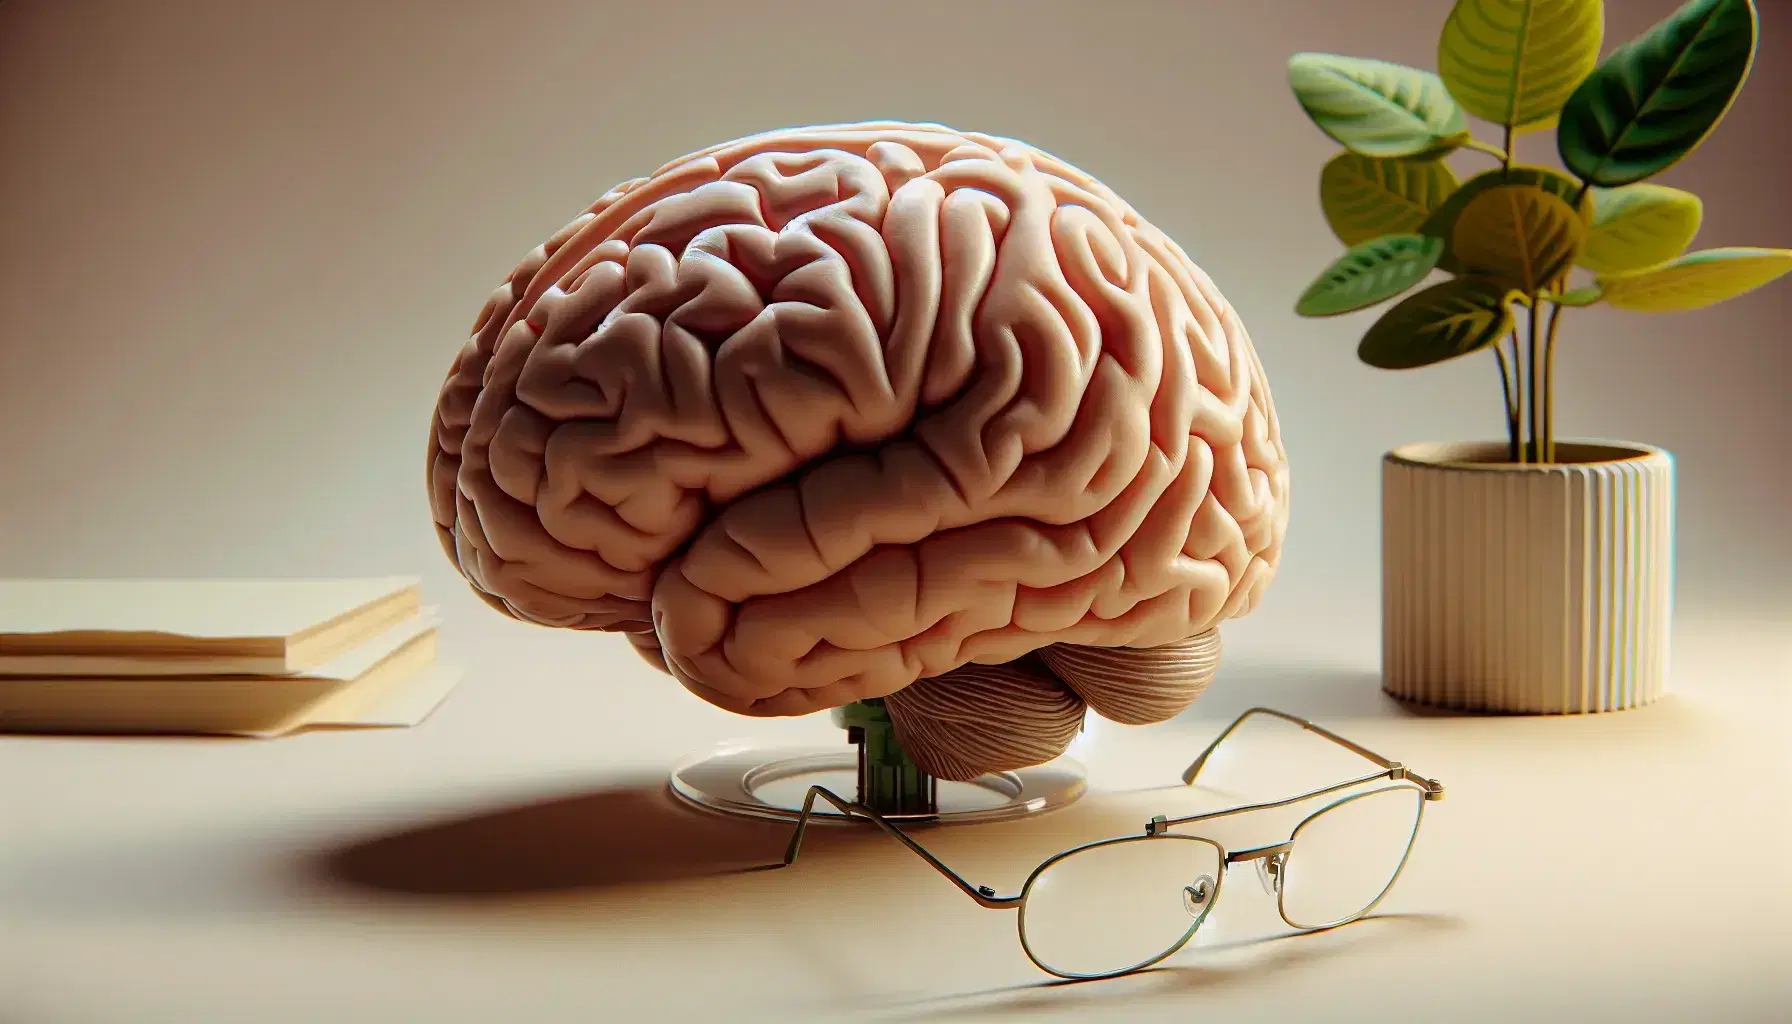 3D human brain anatomical model with metallic glasses and green plant on neutral background, details of visible gyri and sulci.